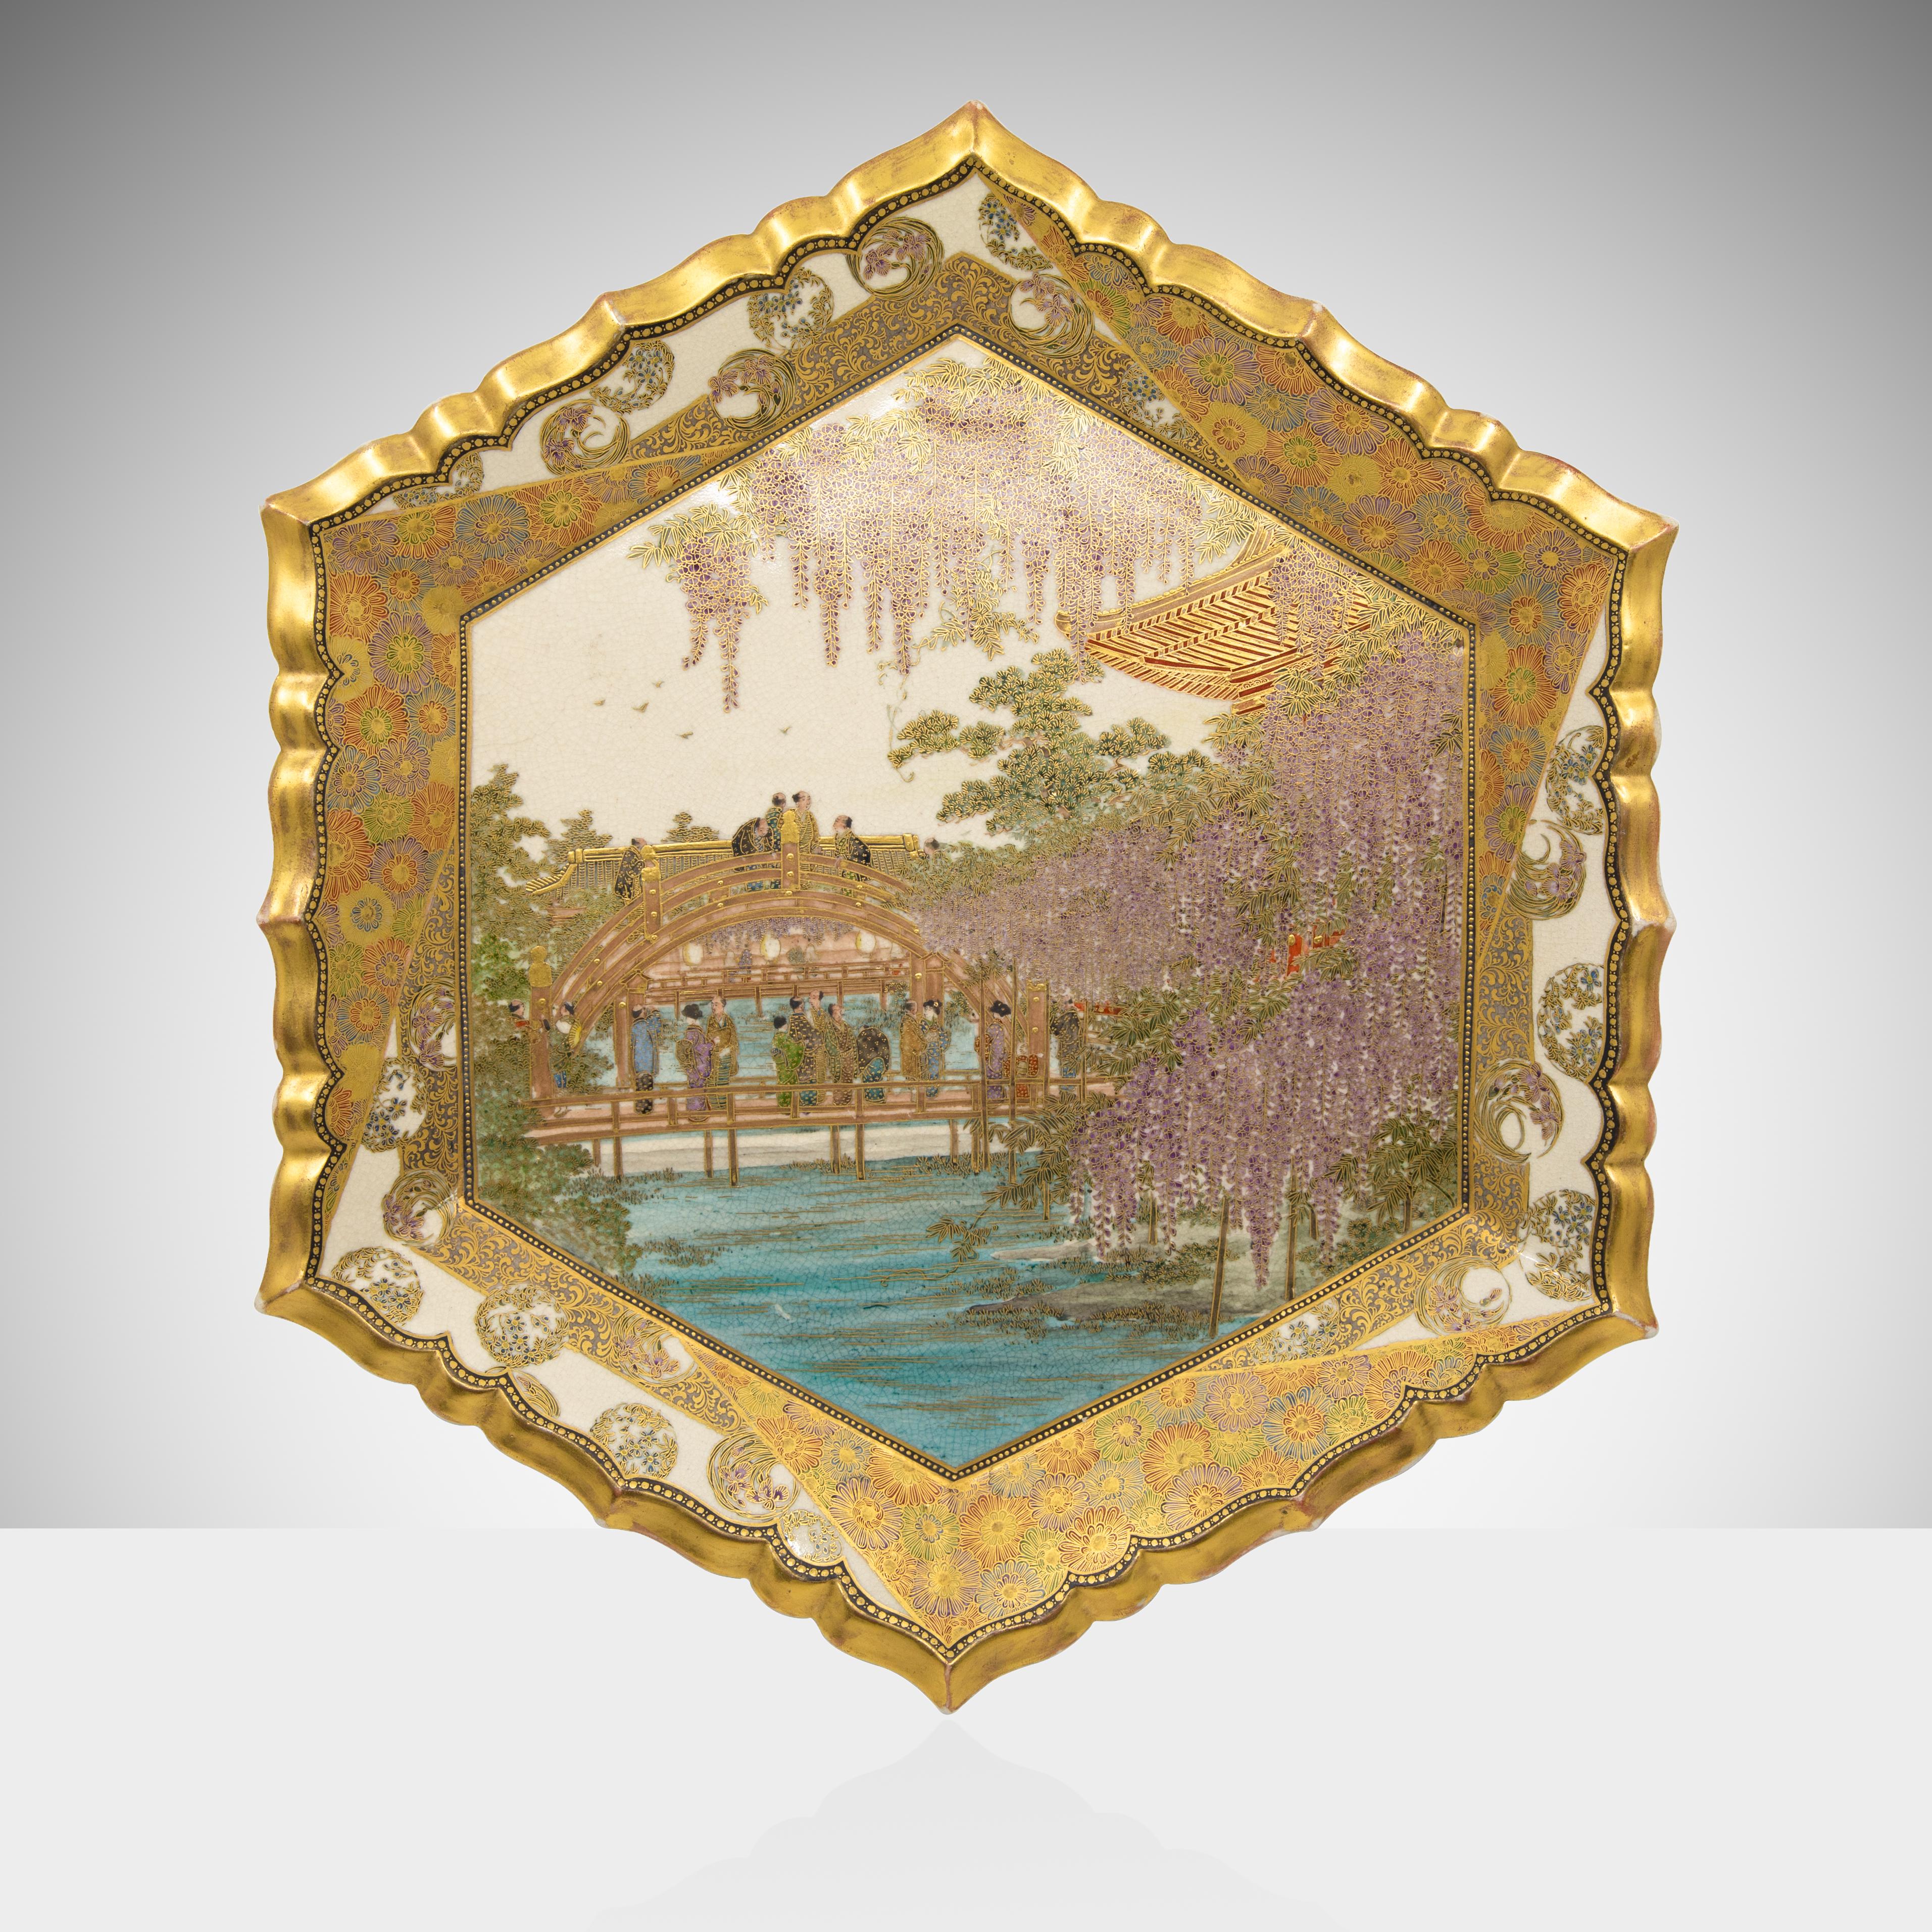 Offered is an exceptional Hozan Satsuma charger exquisitely painted charger. The charger is decorated with chrysanthemum and an iris floral boarder surrounding a delicately painted scene of men and women on a bridge by a tea house outside a temple